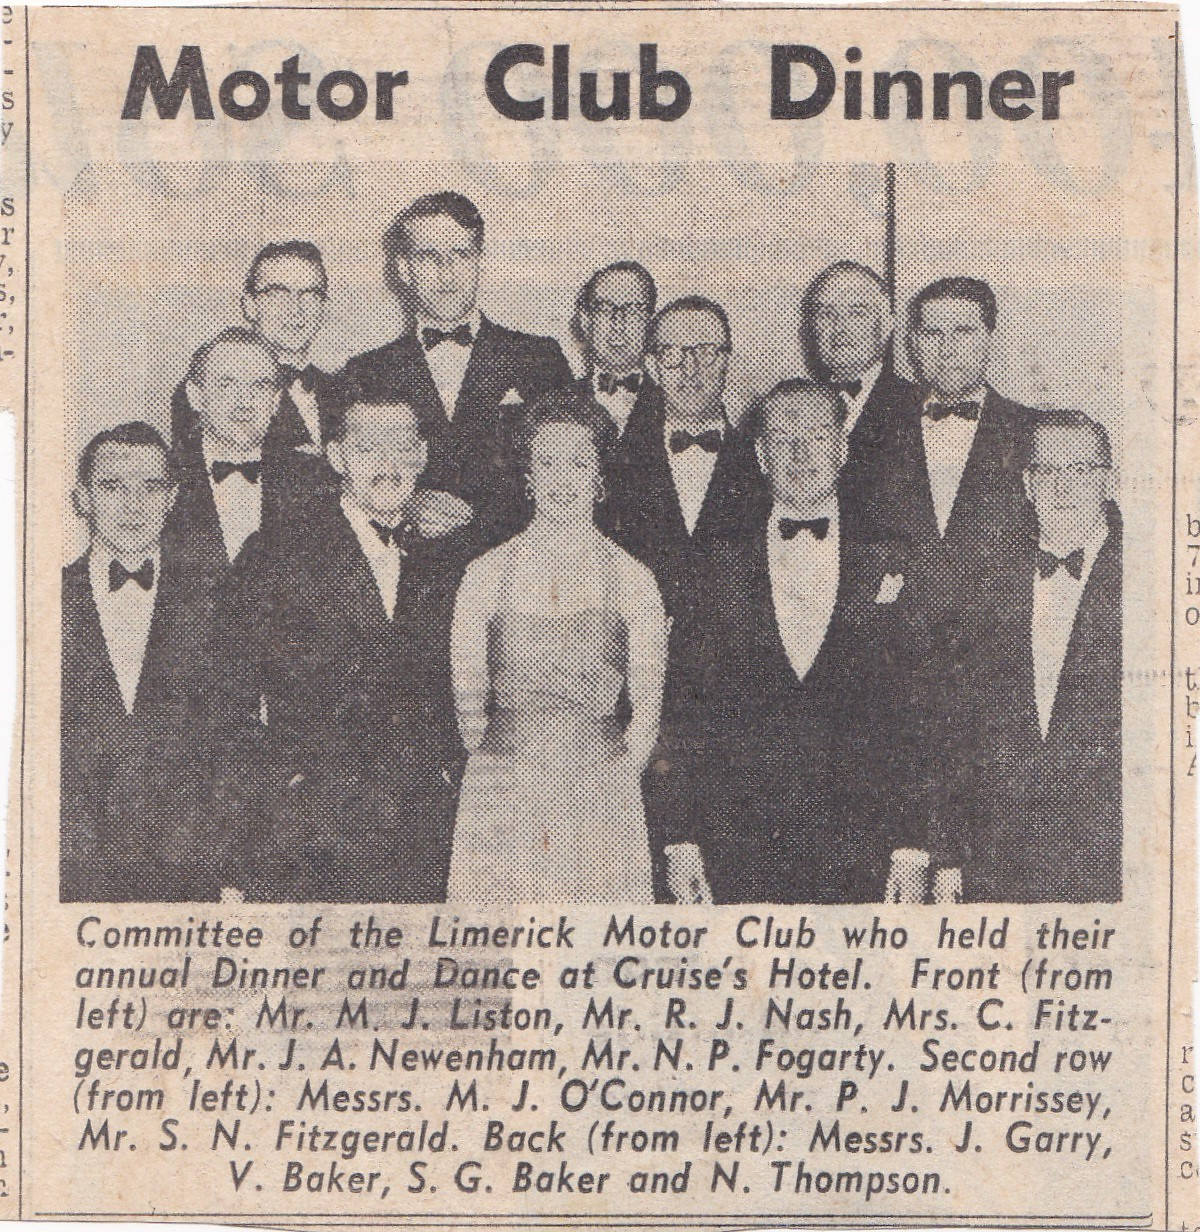 Mid 1950s committee